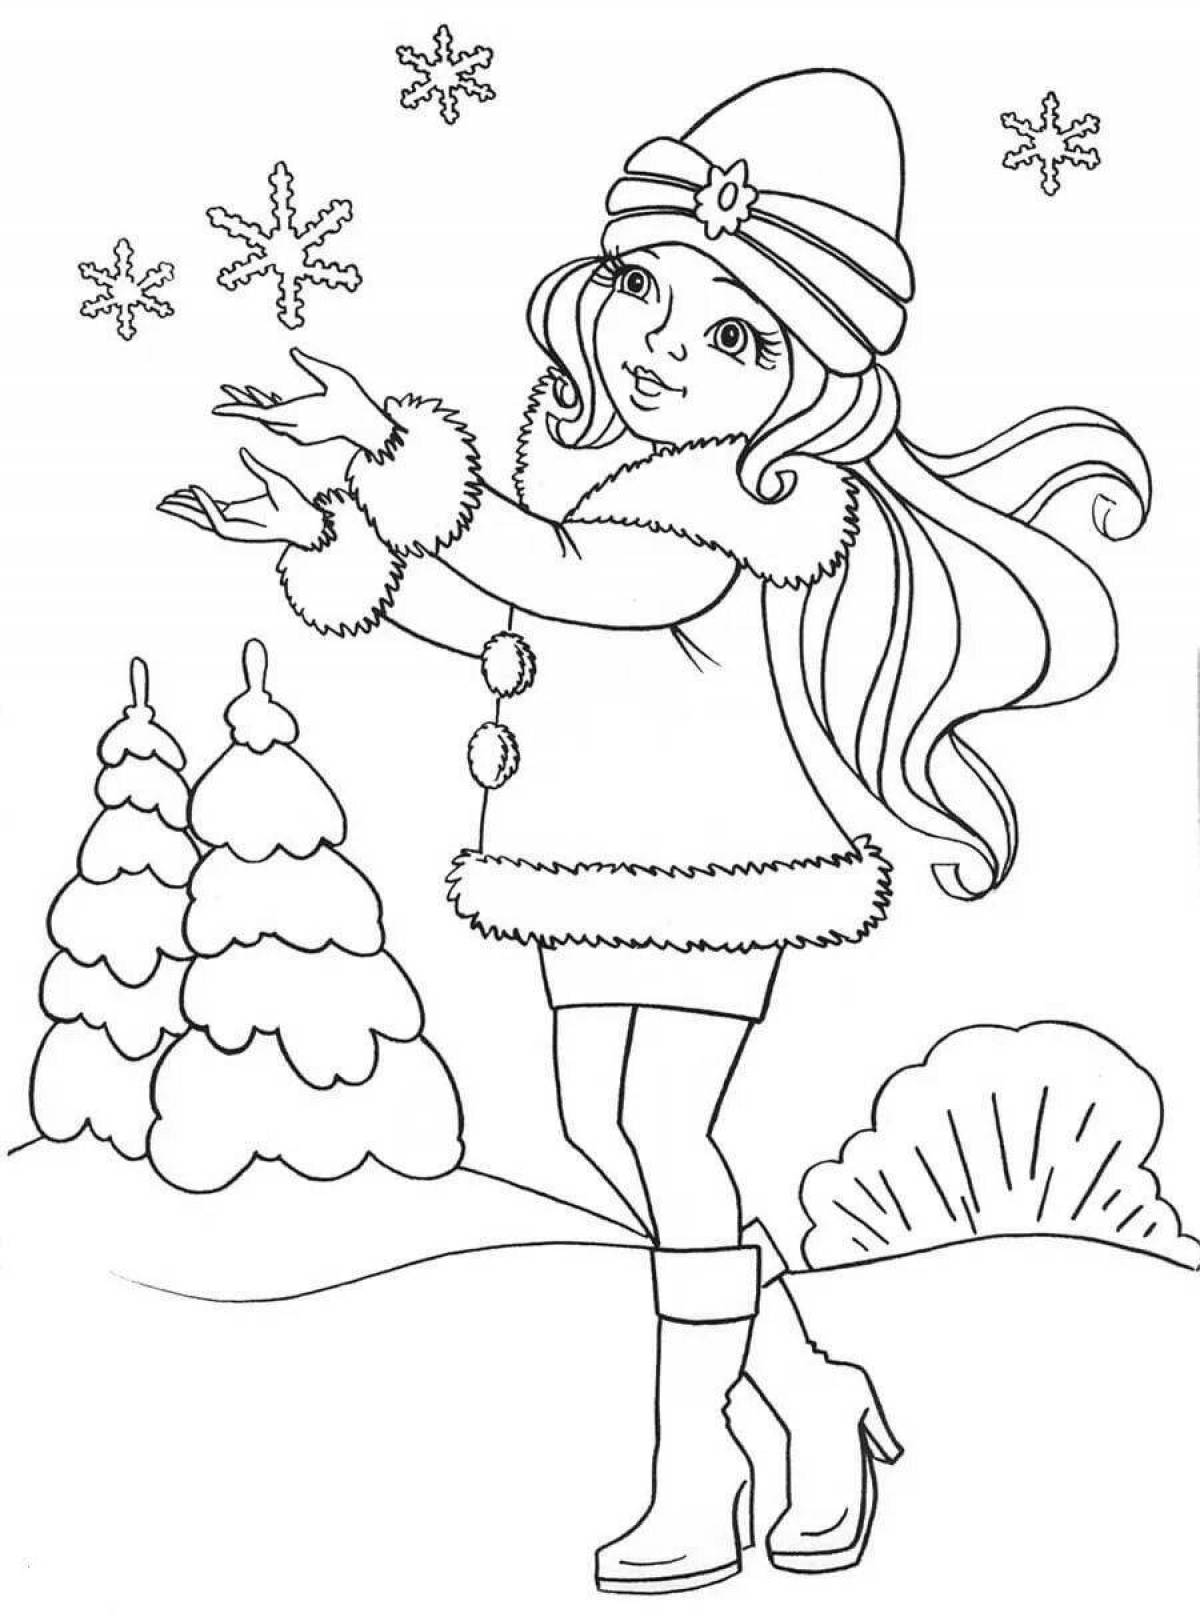 Exciting Christmas coloring book for girls